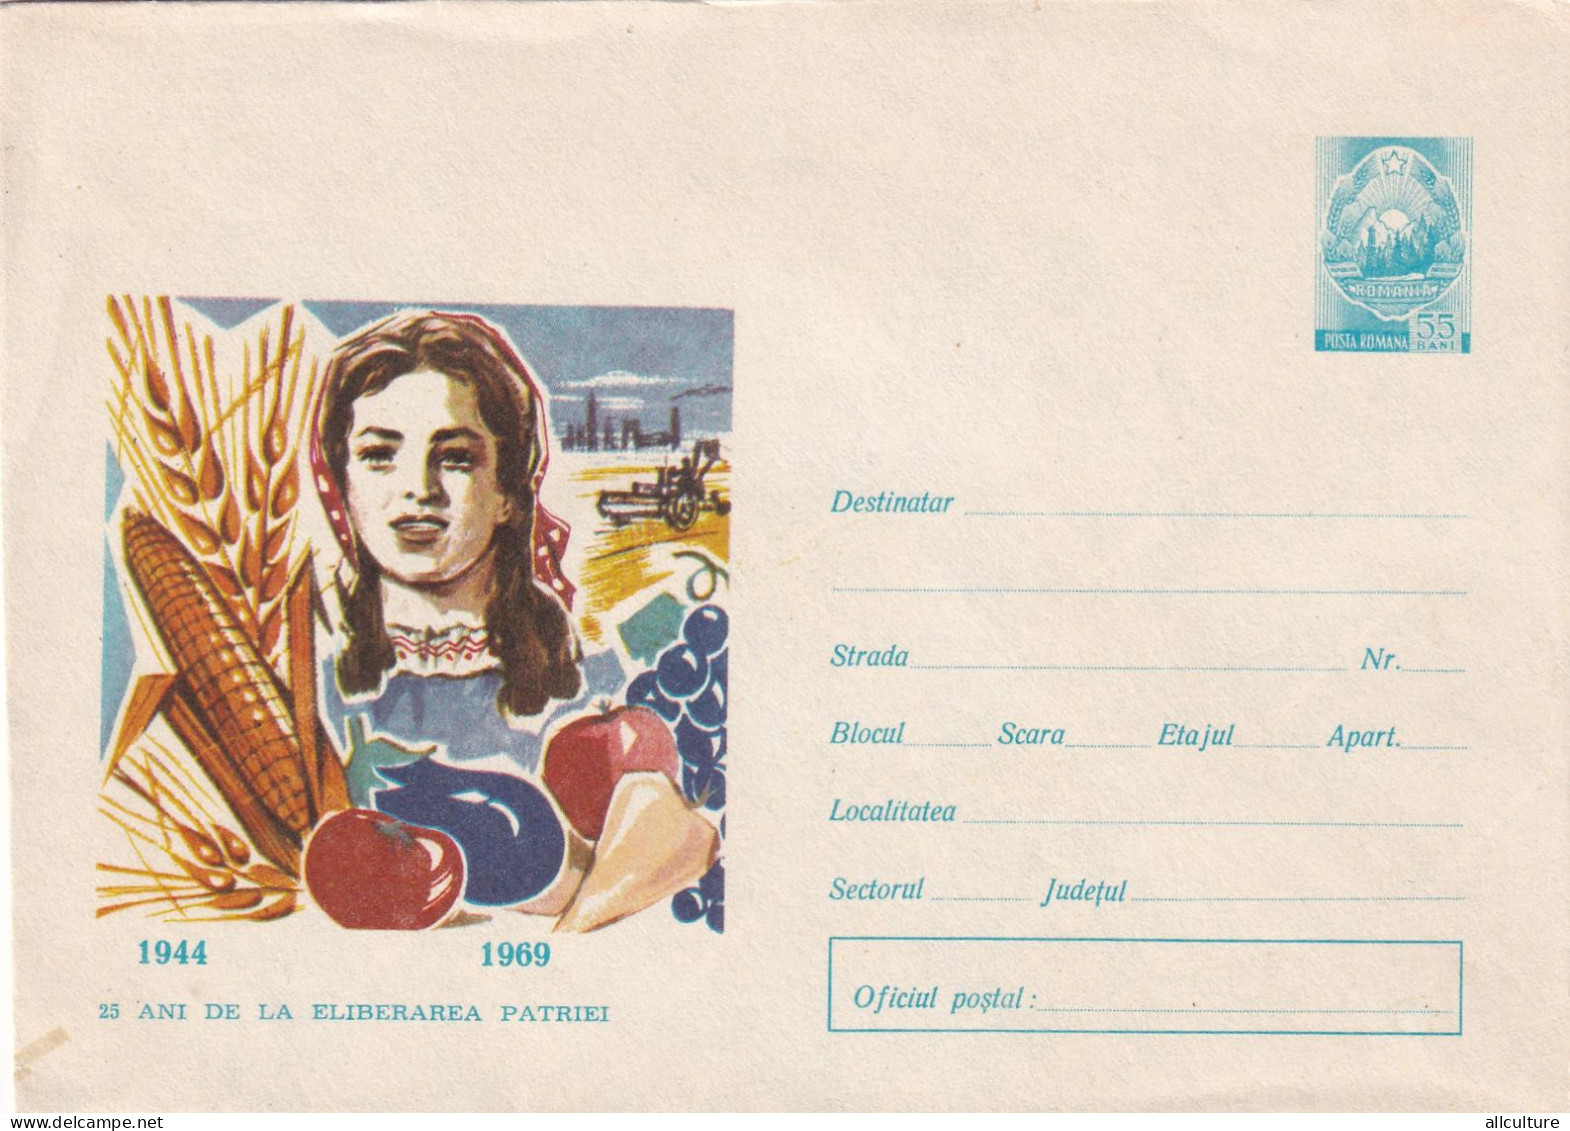 A24518 -  25 YEAR OF FREEDOM COUNTRY ROMANIA  1944 - 1969 COVER STATIONERY  1969  Romania - Ganzsachen